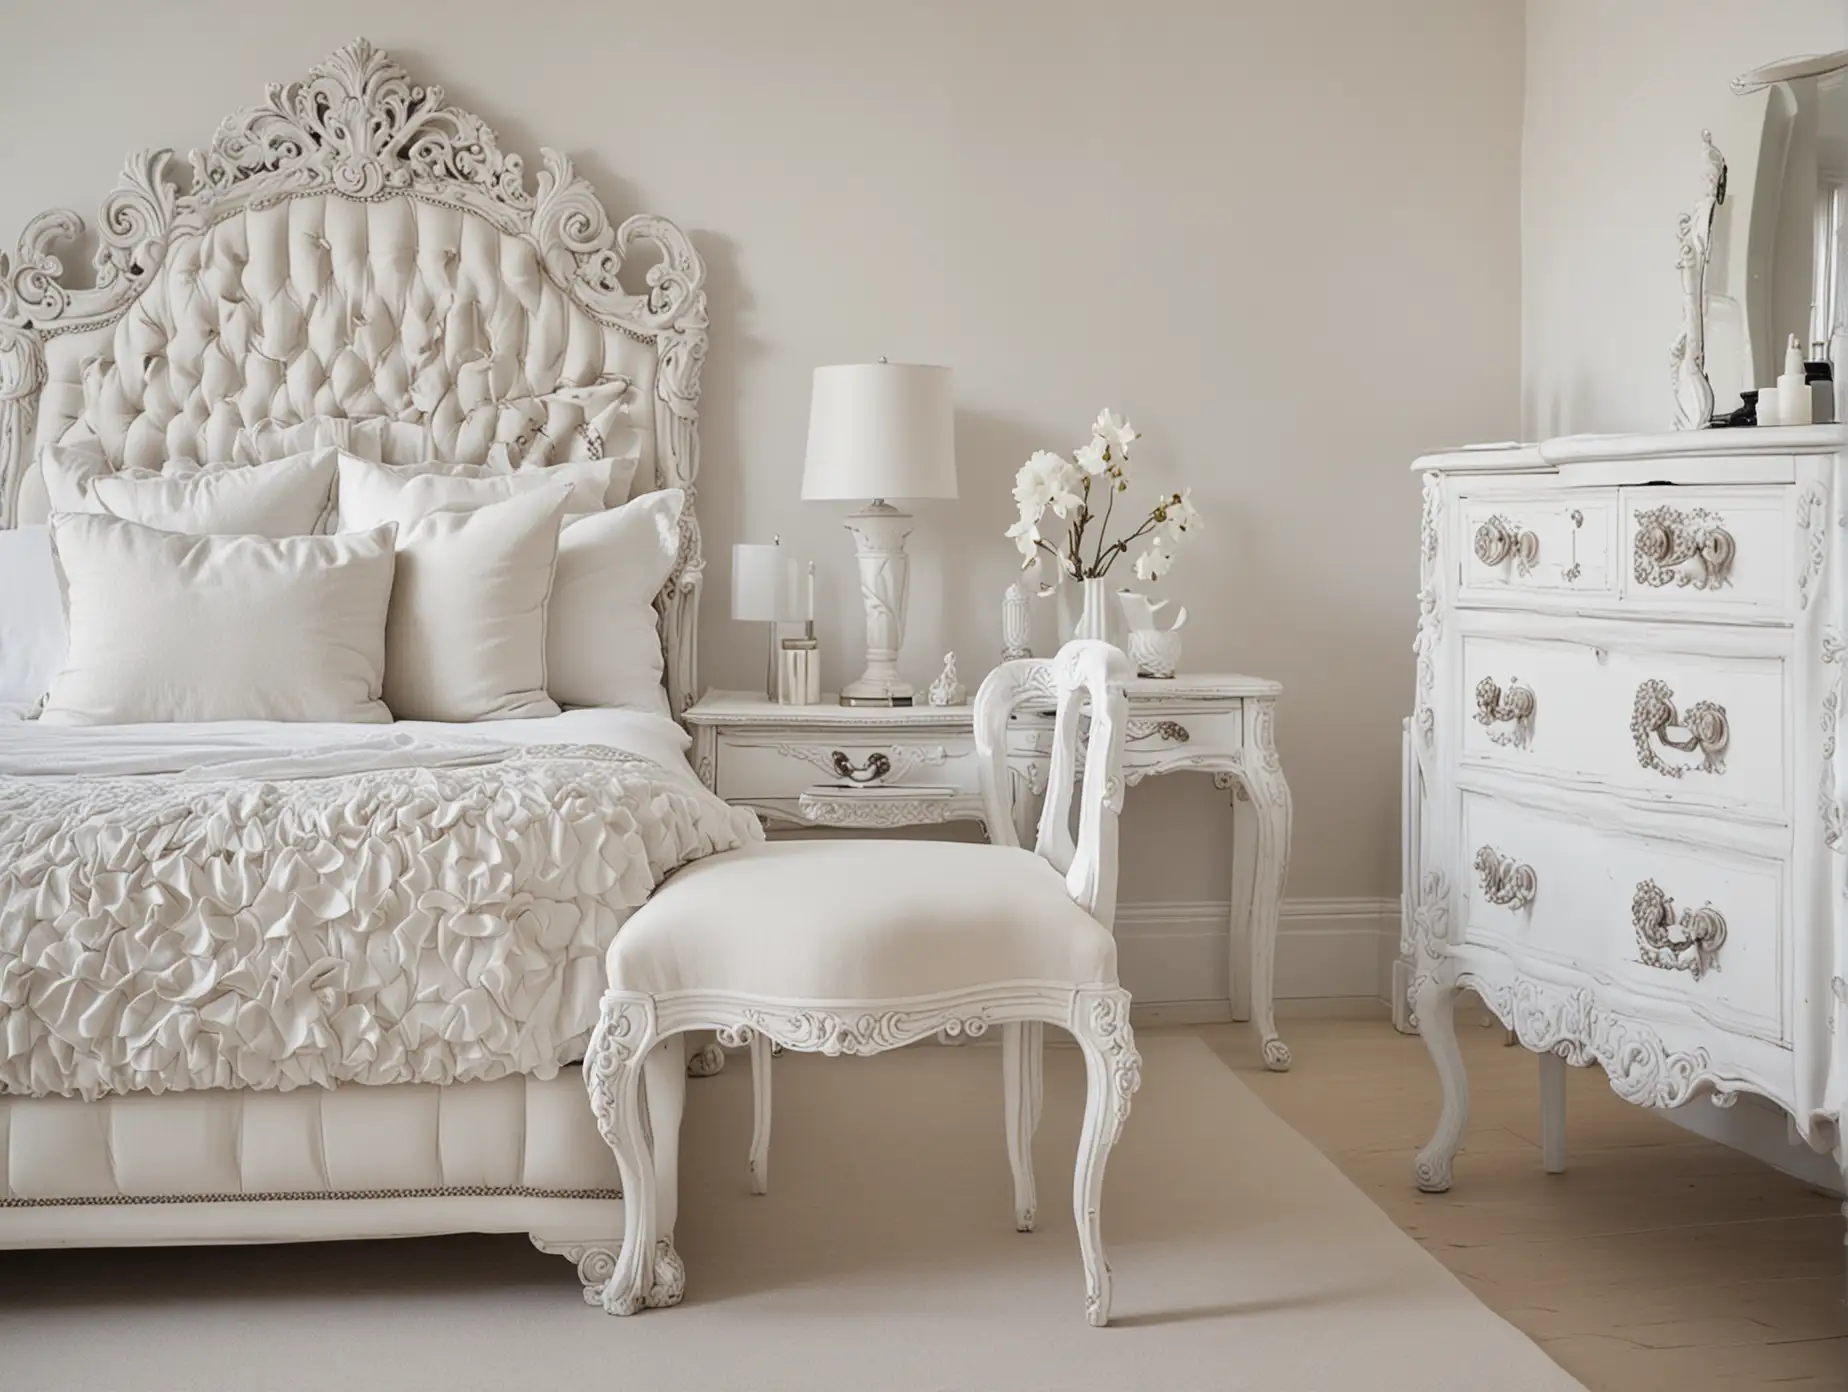 ORNATE WHITE CHAIR IN FRONT OF BED IN LUXURY WHITE BEDROOM